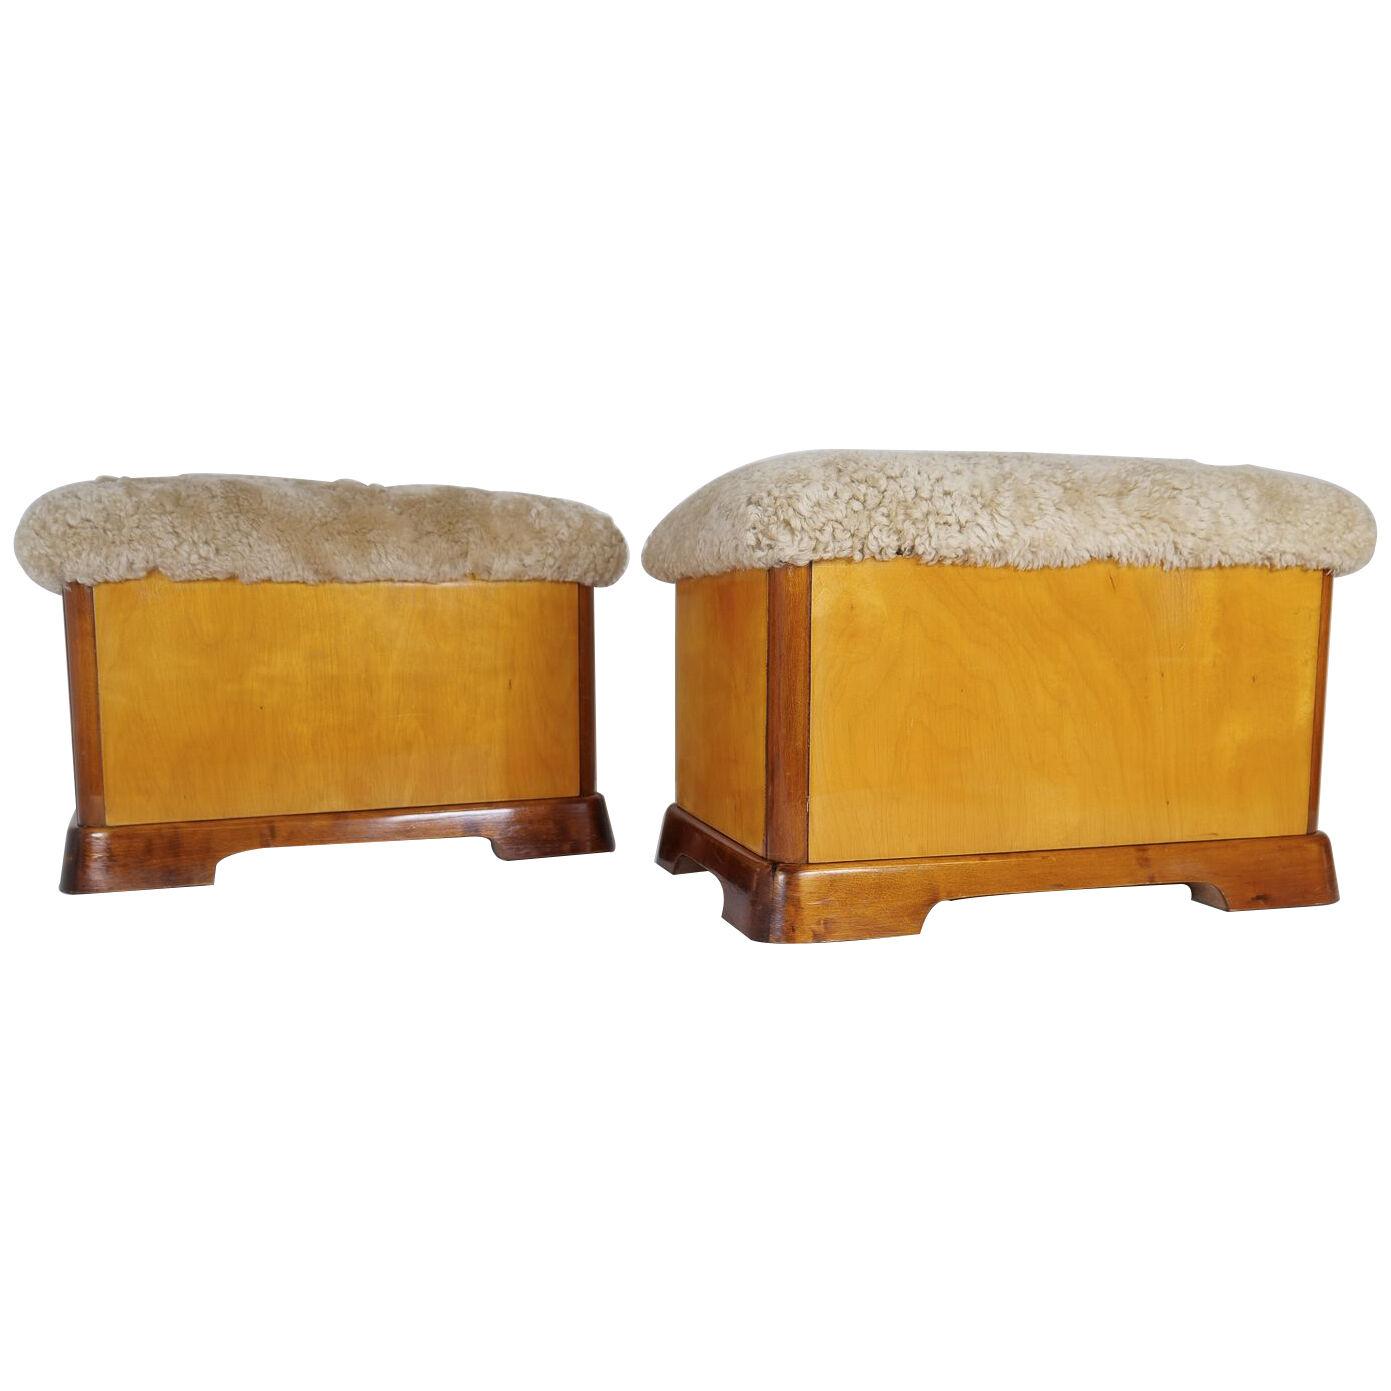 Art Deco Swedish Stools in Lacquered Birch and Mahogany and Sheepskin Seat 1940s